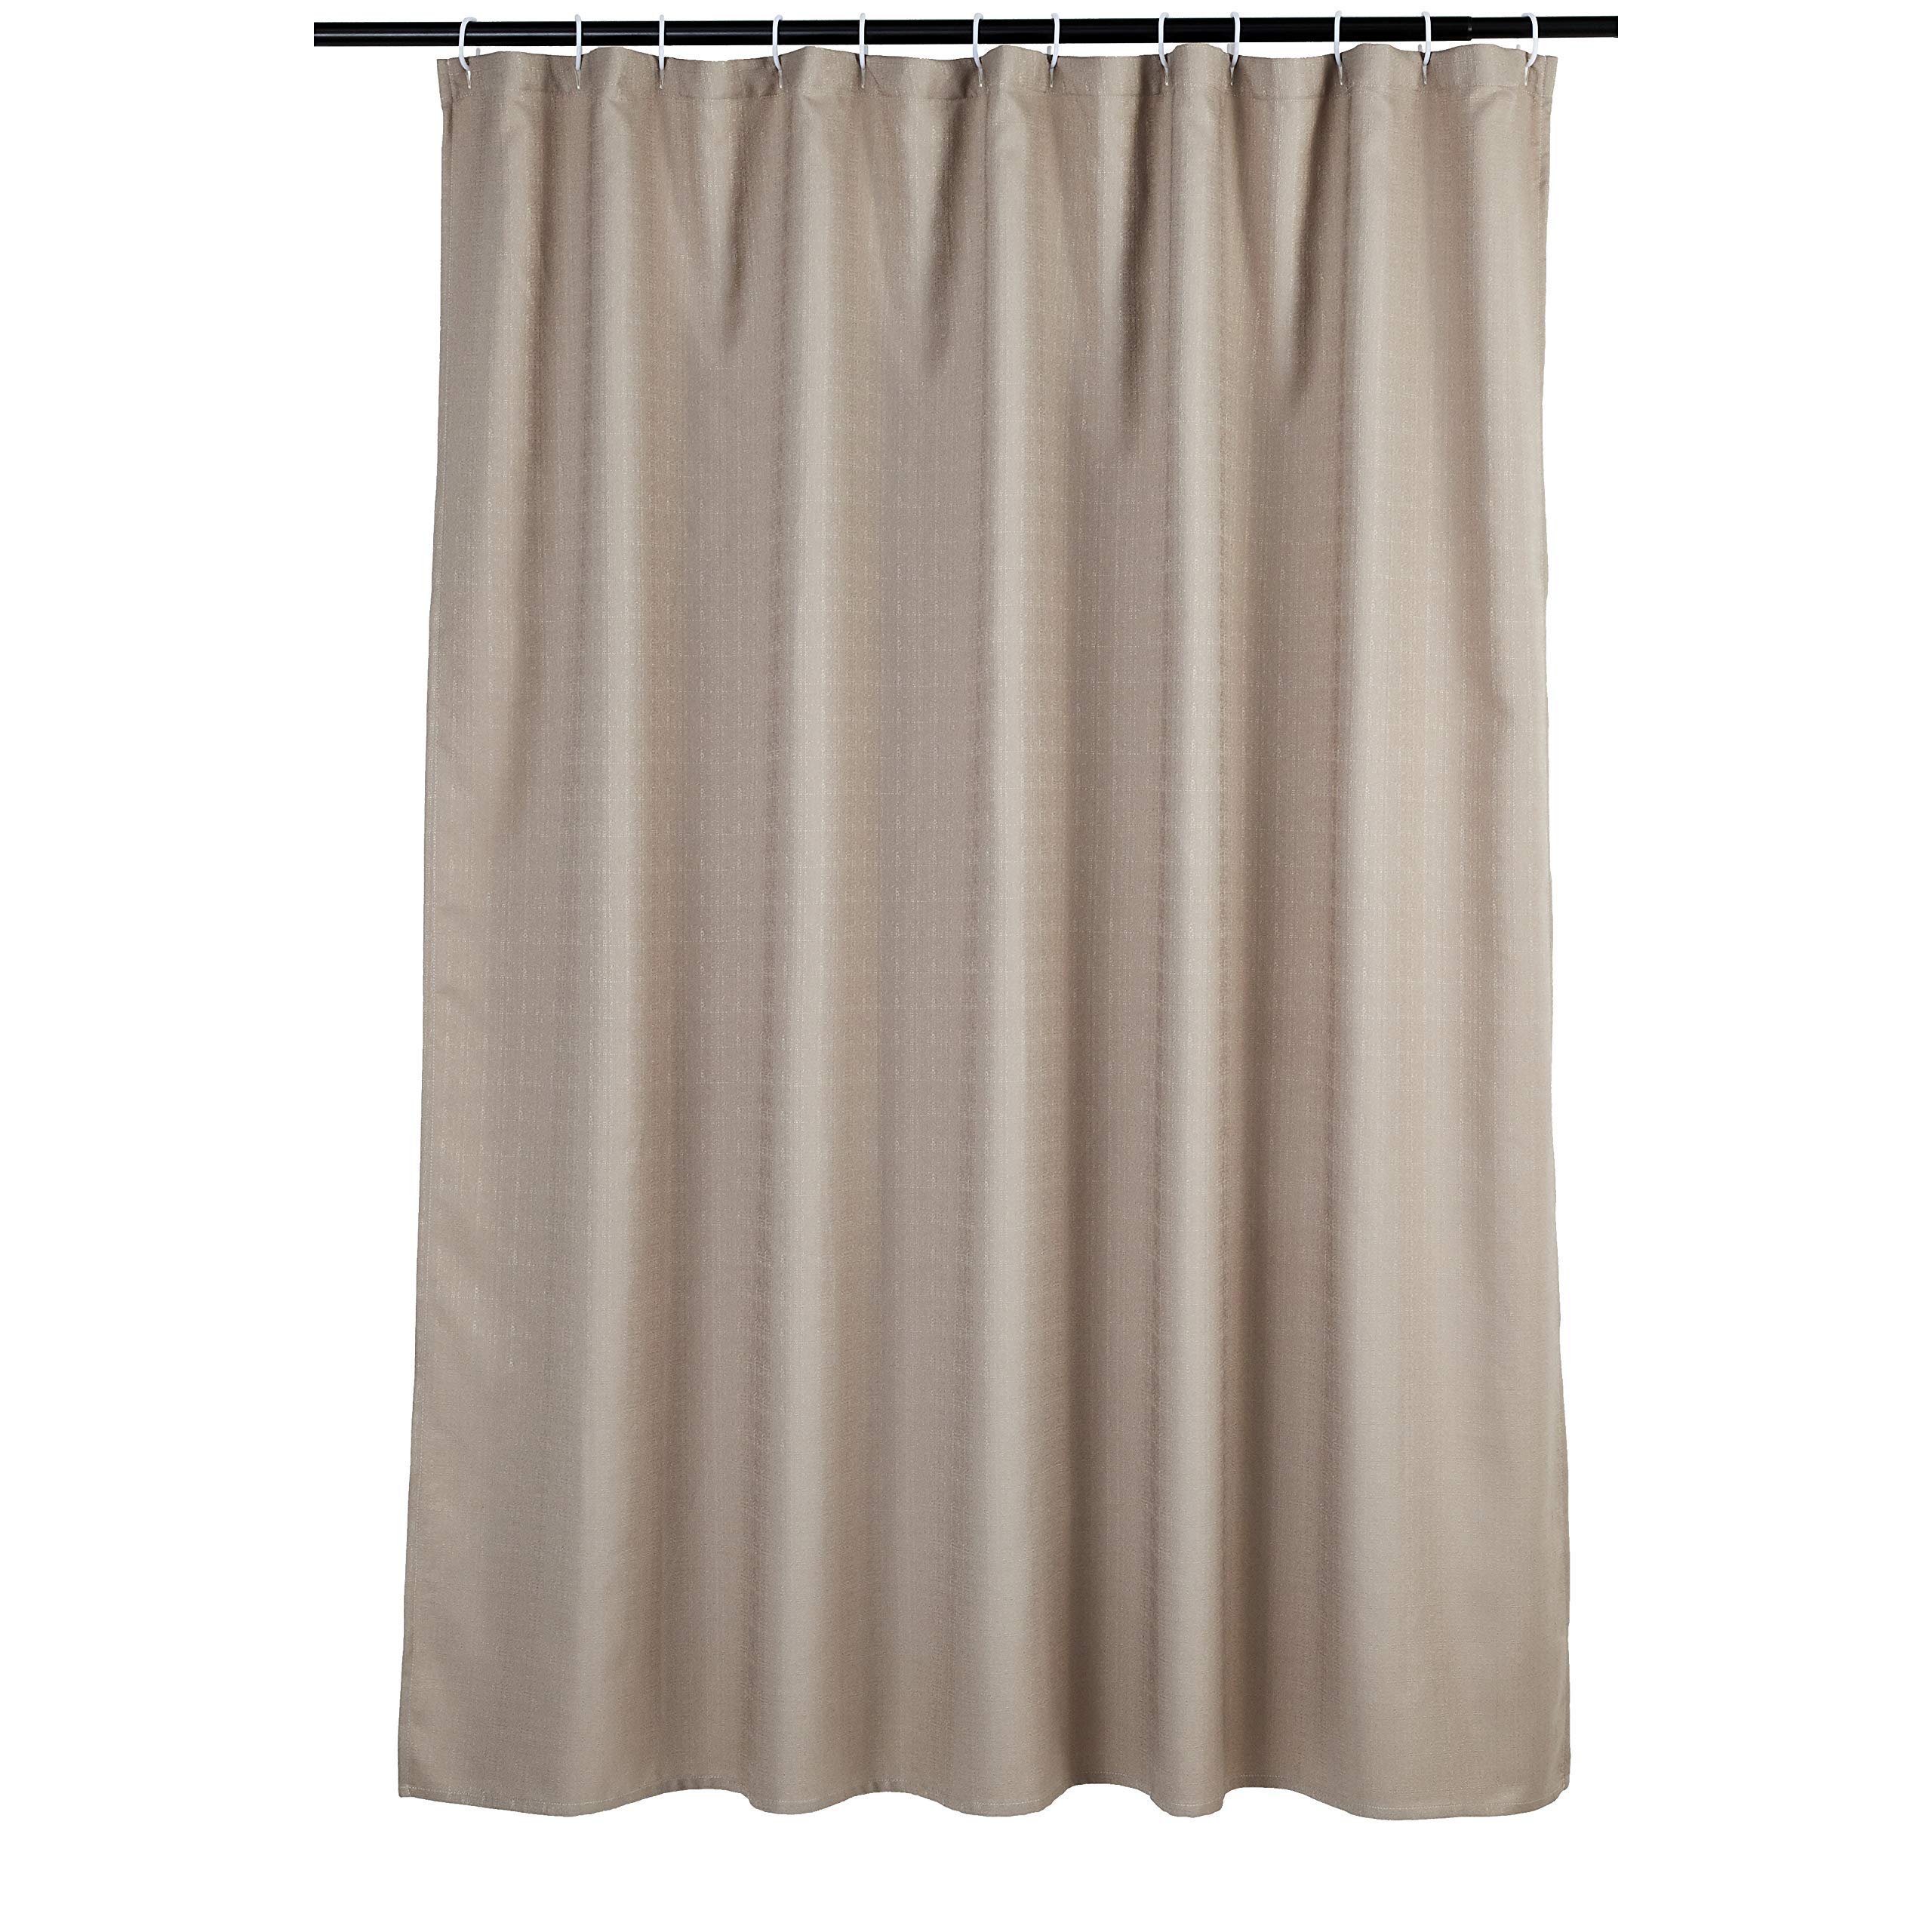 Book Cover Amazon Basics Linen Style Bathroom Shower Curtain - Taupe, 72 Inch Taupe Linen Style